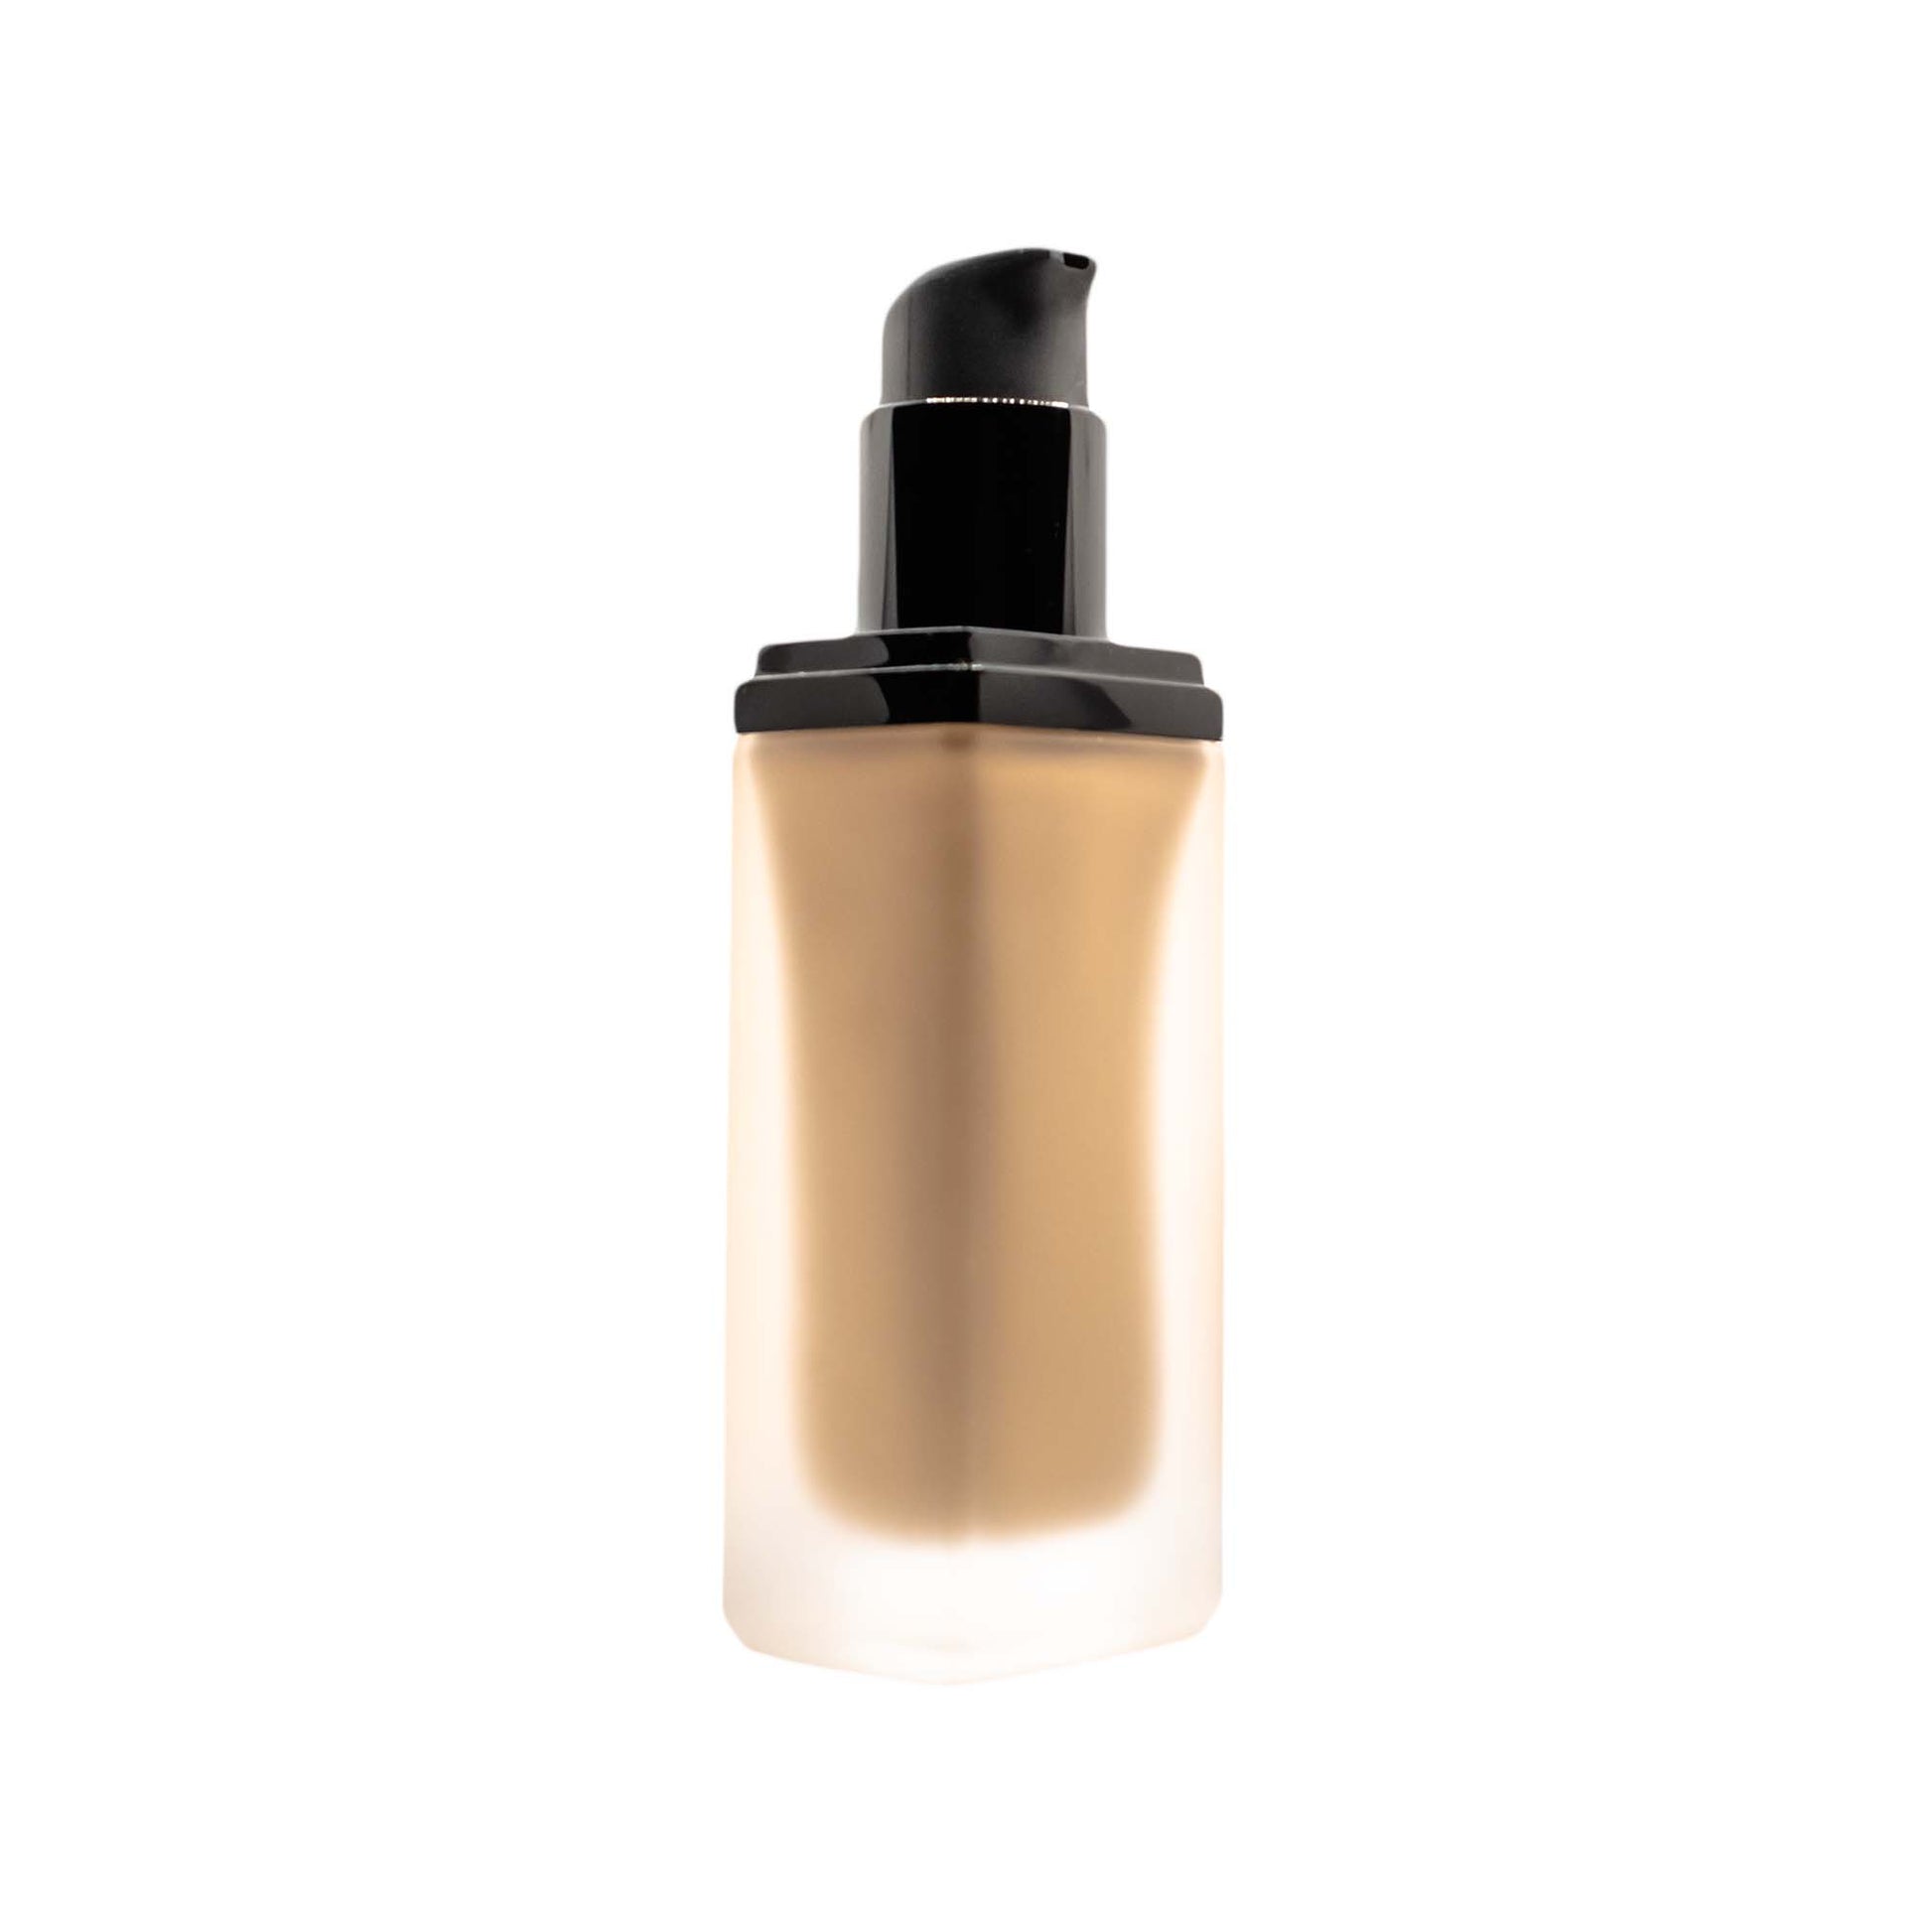 White background showcasing a bottle of Foundation With Spf